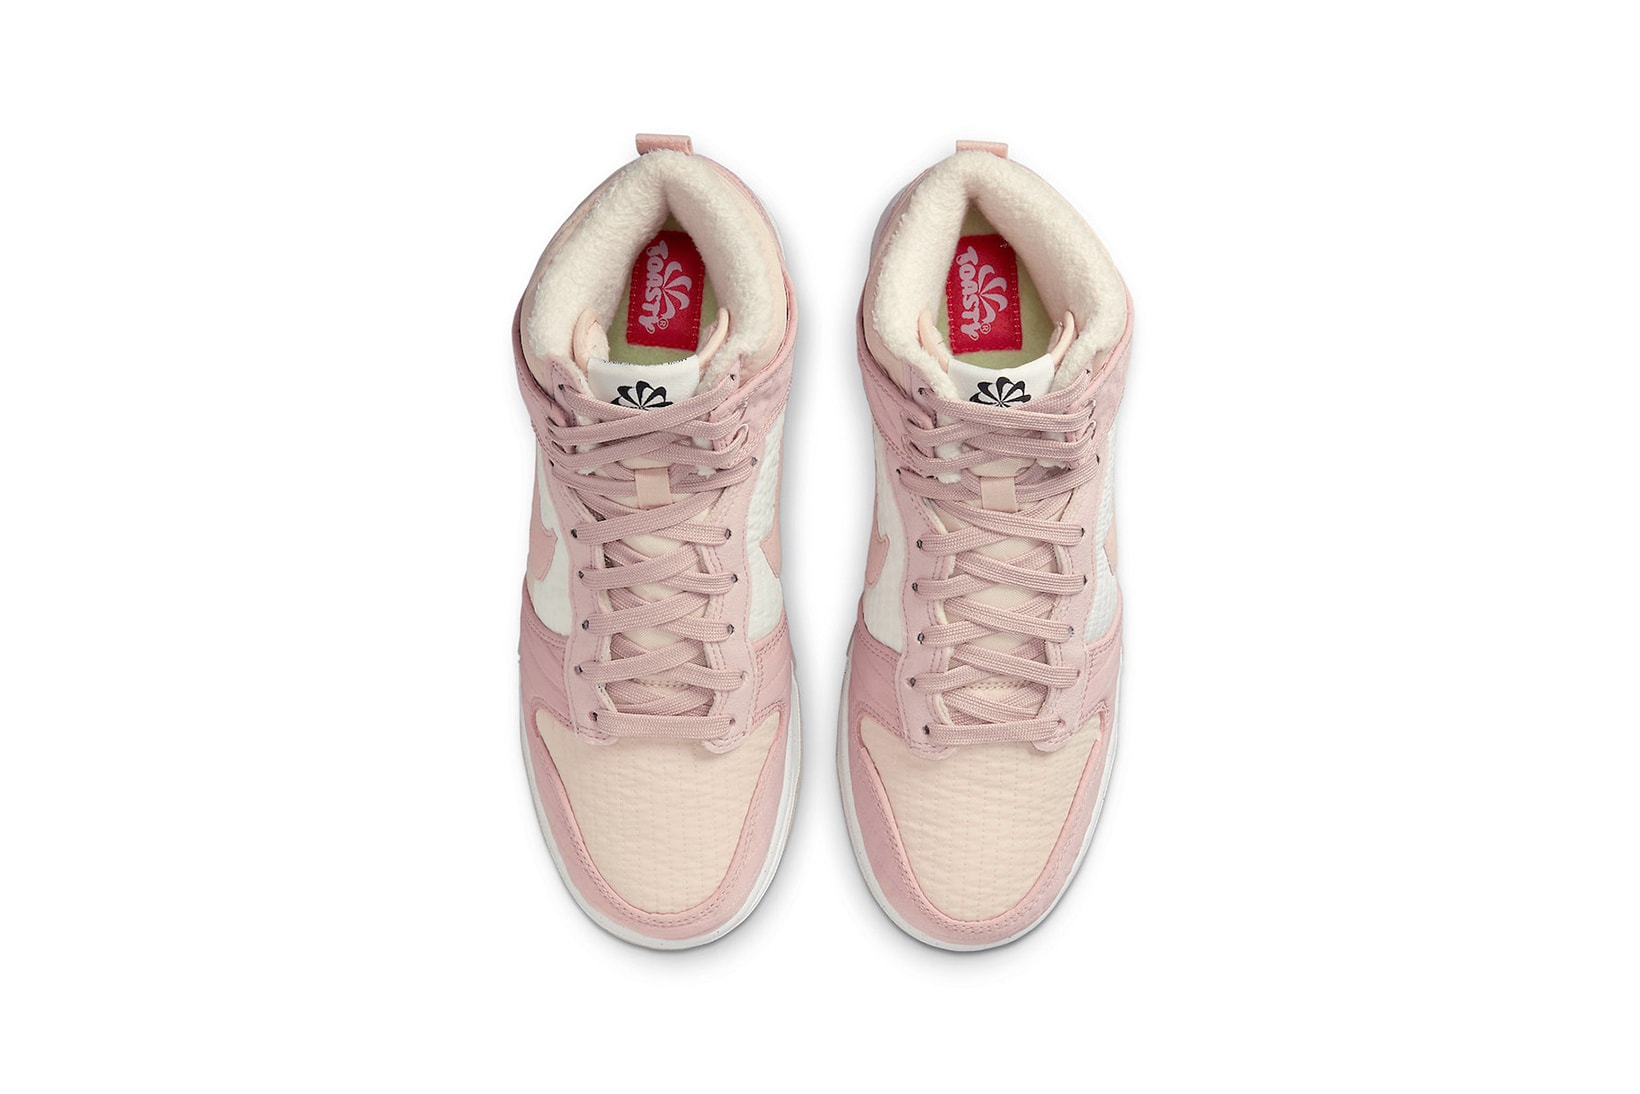 Nike Dunk High Toasty Pink White Womens Sneakers Shoes Kicks Footwear Sustainable Top View Insoles